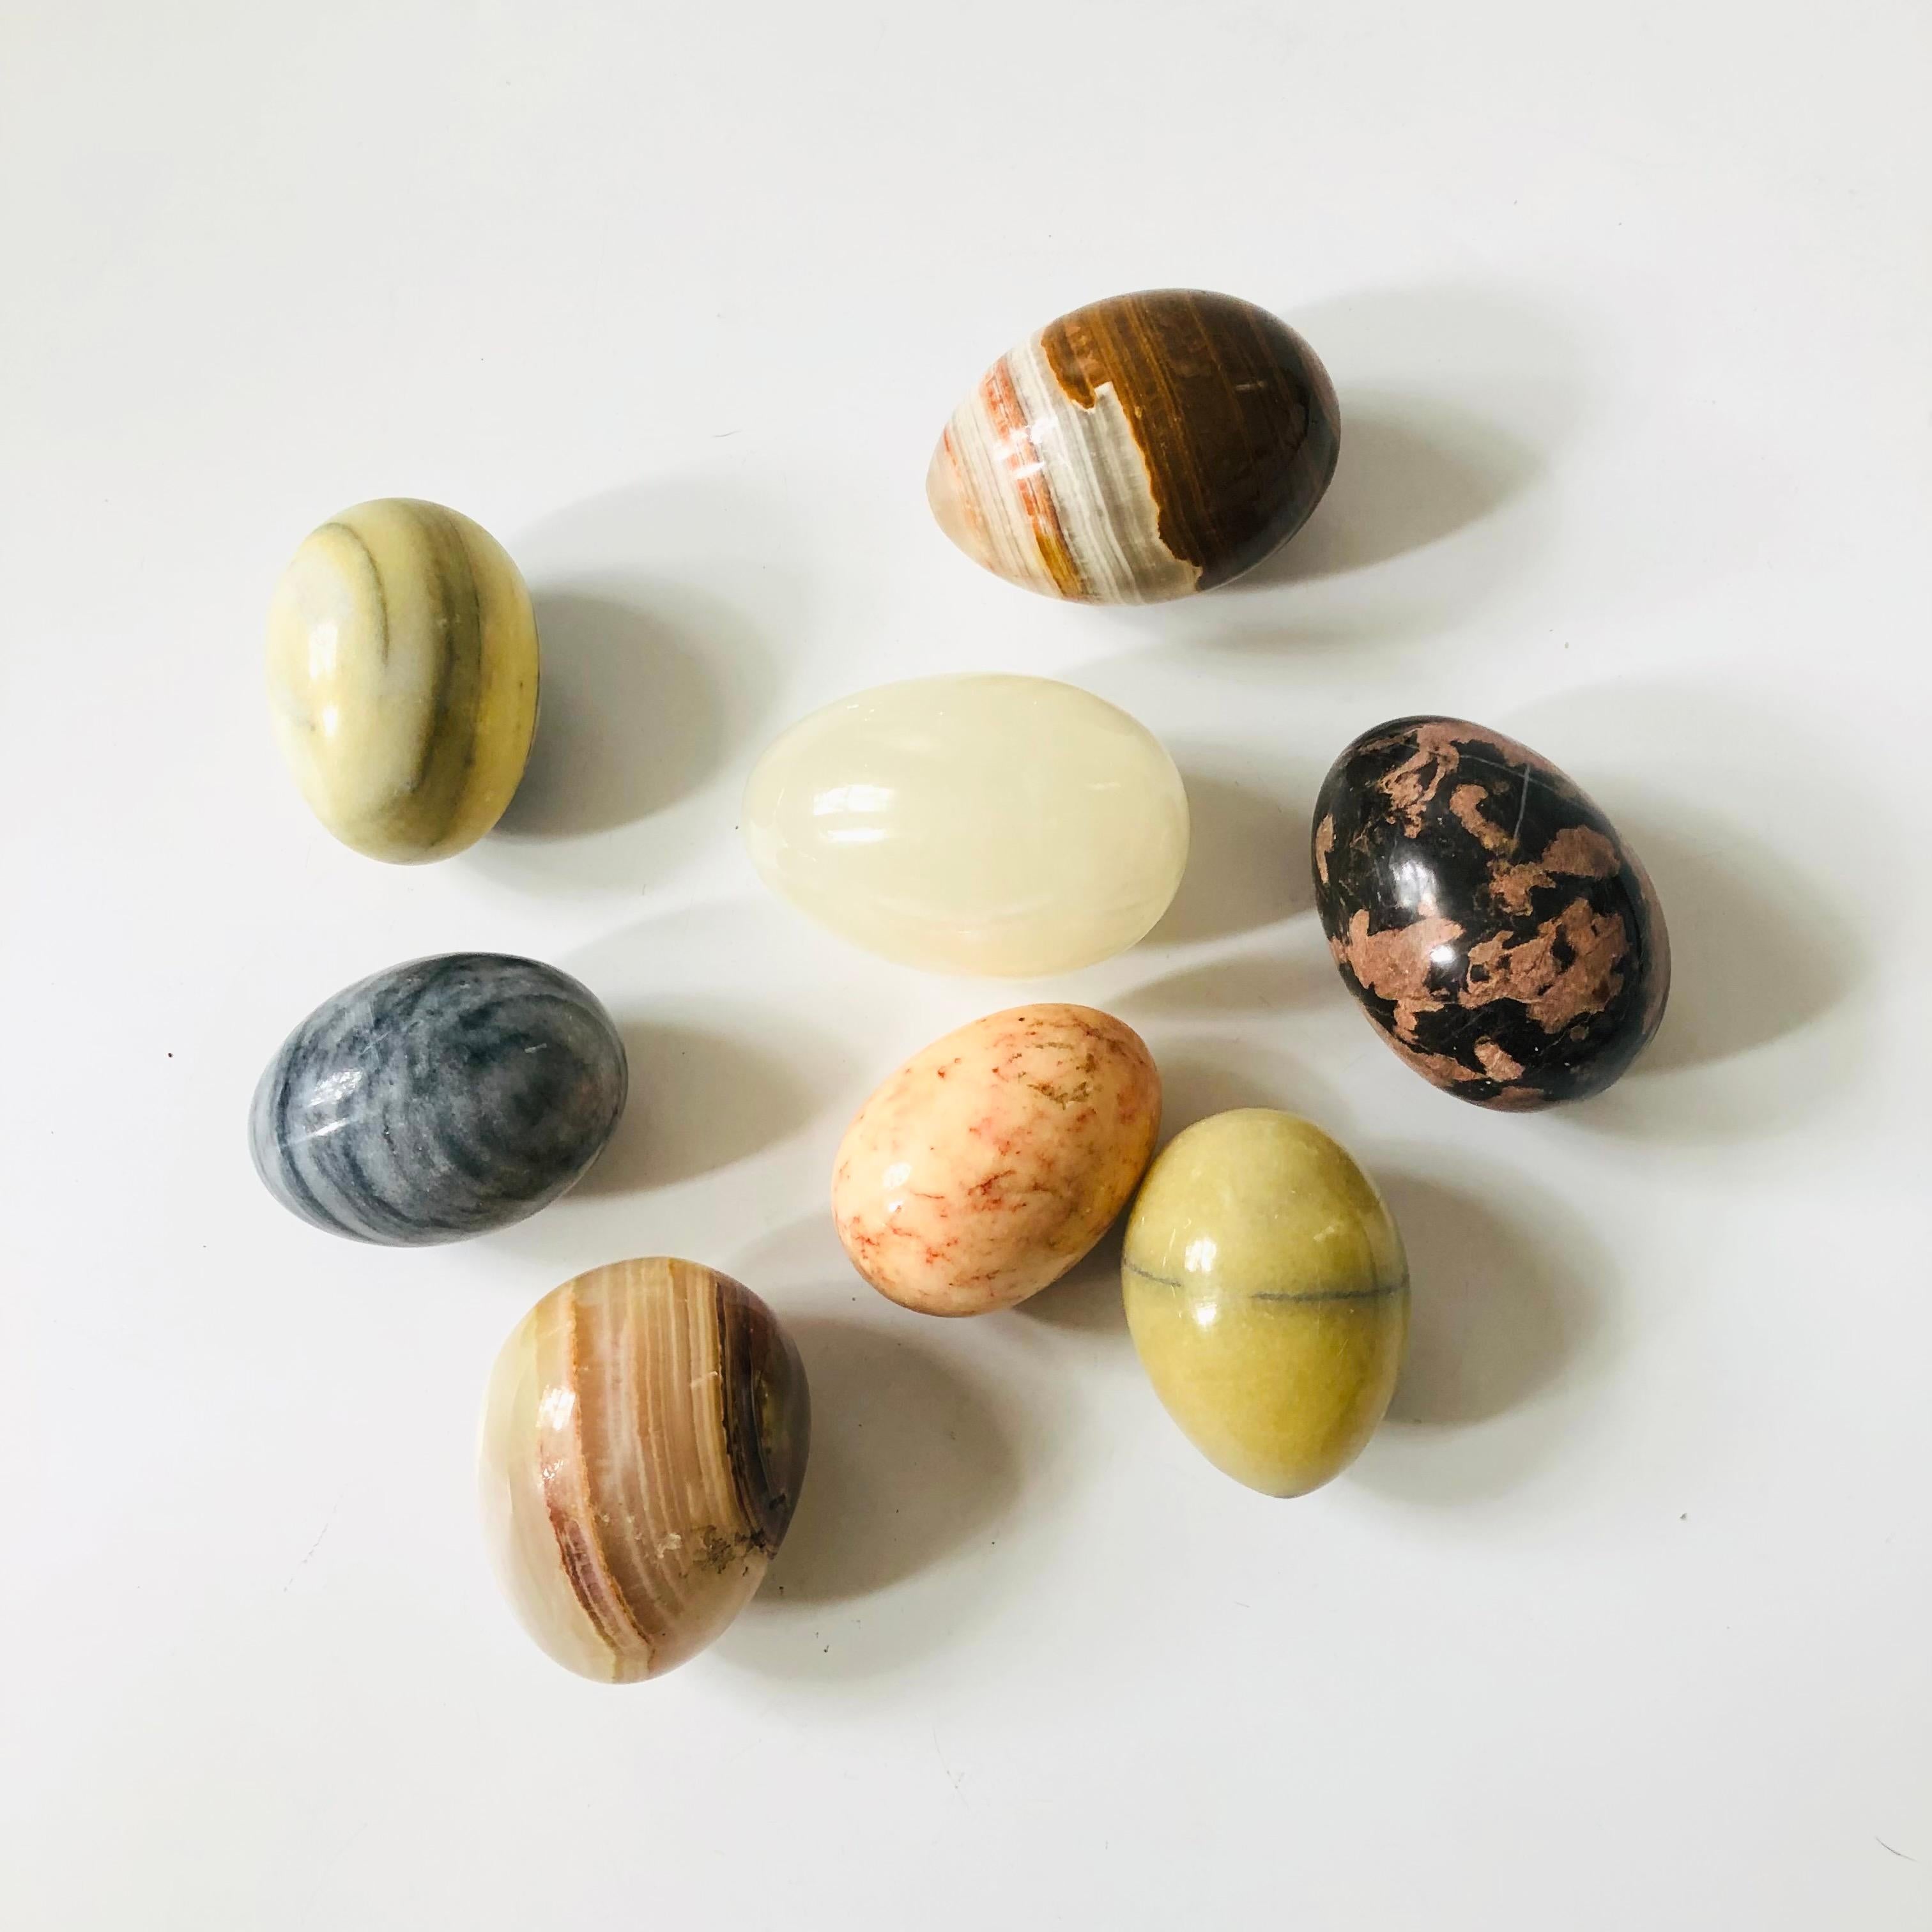 A set of 8 decorative alabaster eggs. Beautiful variety of colors and natural veining to the stone.
Each measures approximately 2.5